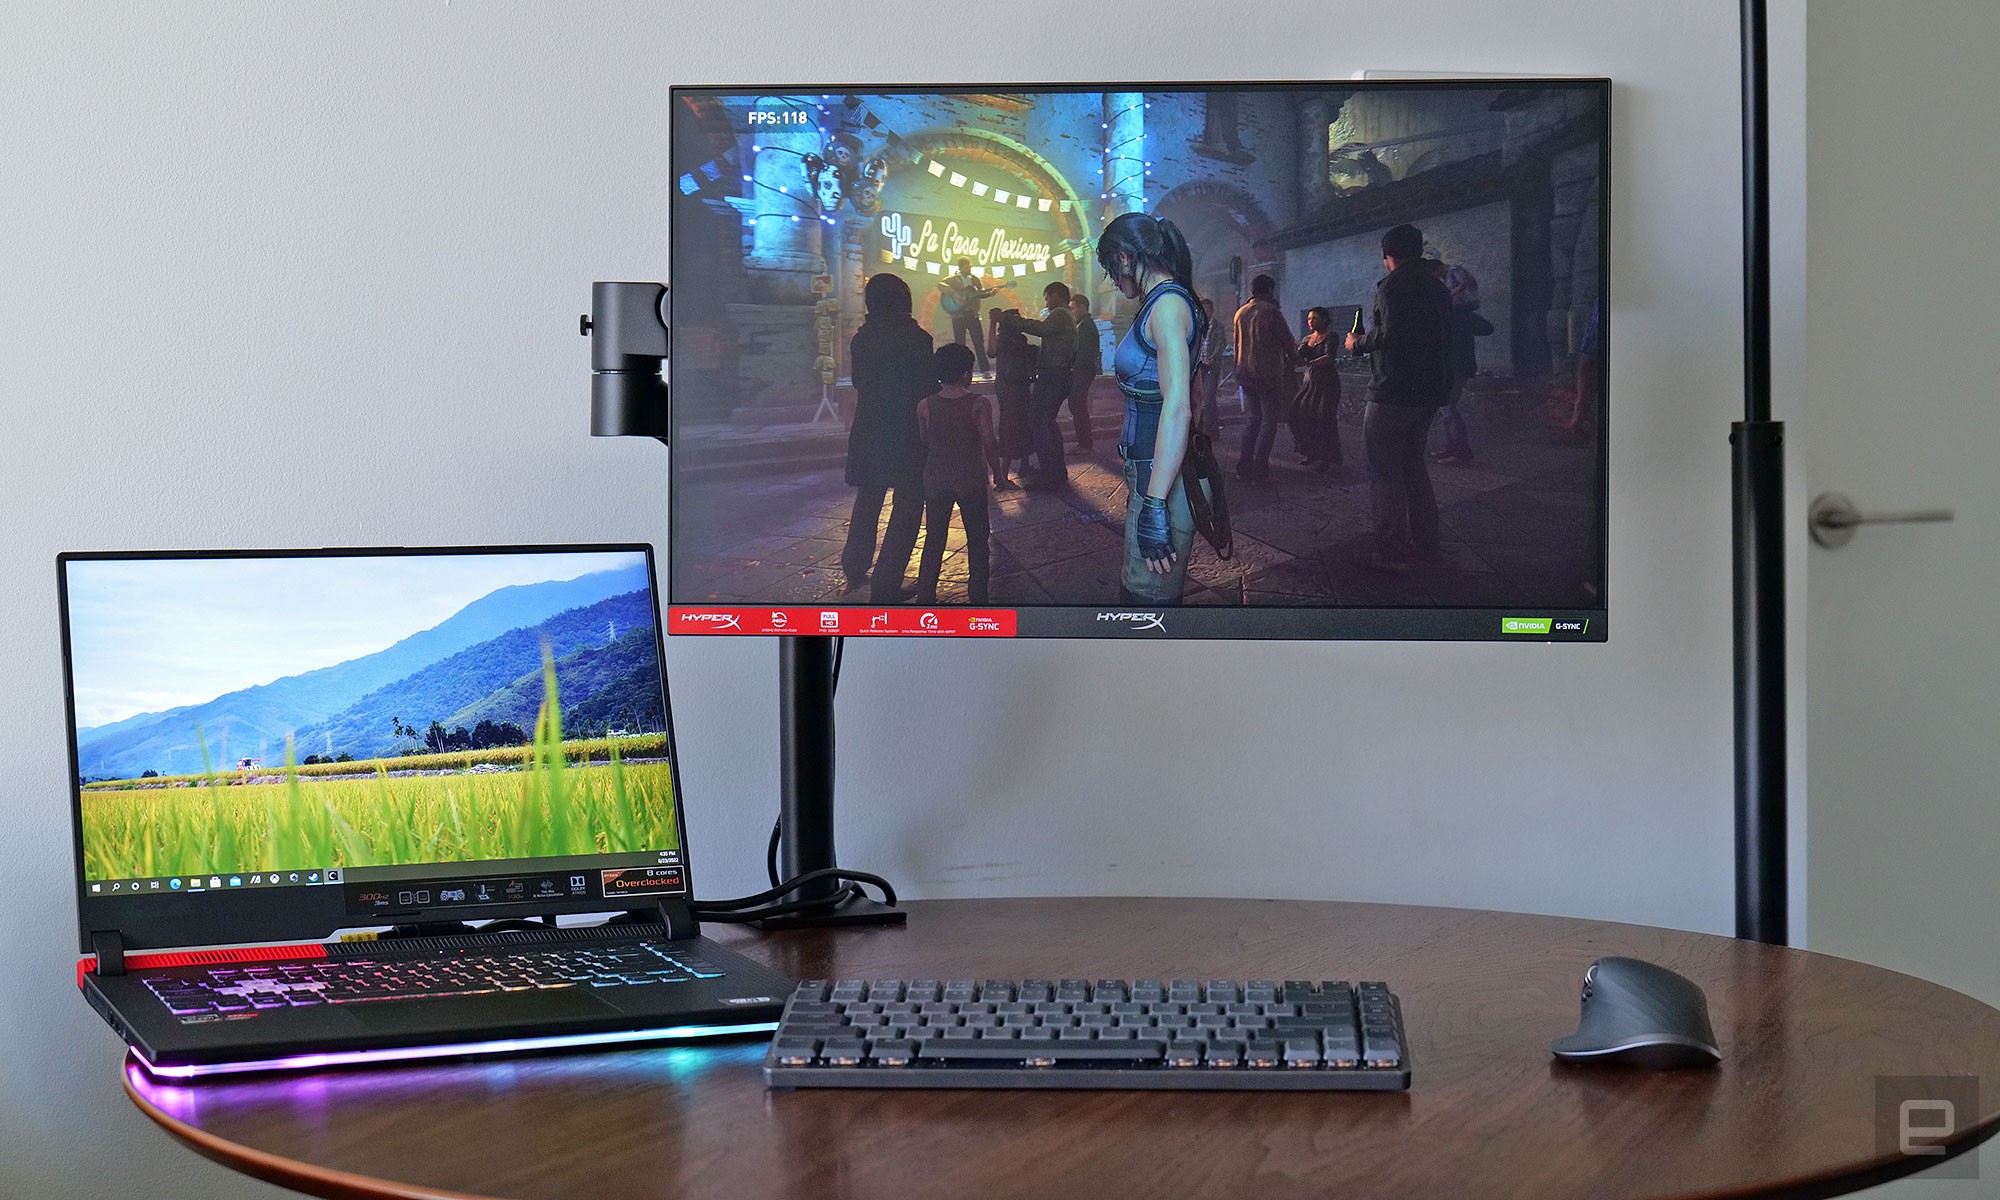 Unlike a lot of other monitors in this price range, HyperX's new Armada 25 comes with an included ergonomic arm and skips the traditional monitor stand.